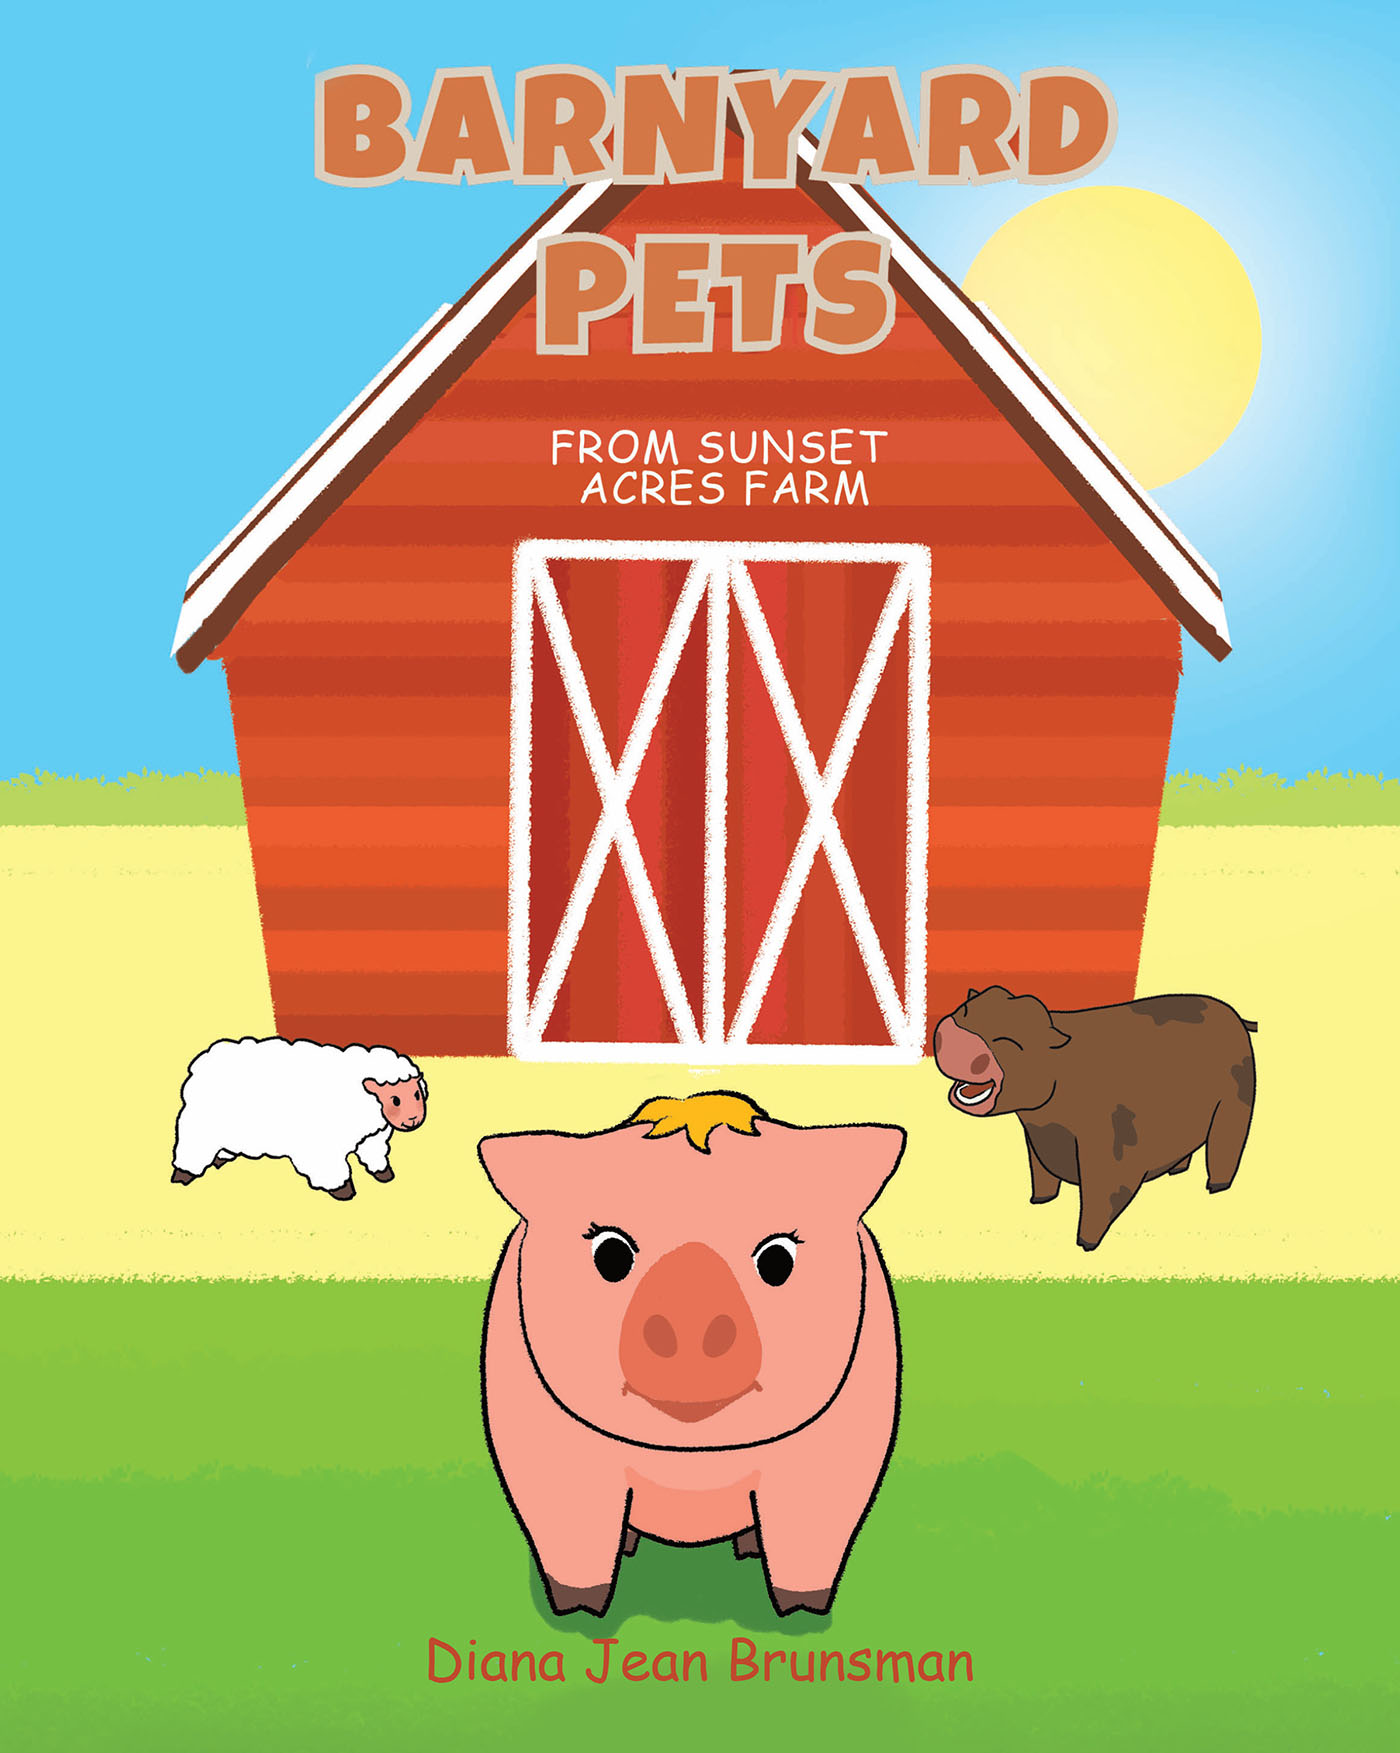 Diana Jean Brunsman’s New Book, "Barnyard Pets," is a Delightful Story About the Exciting Adventures of Different Farm Animals Who All Work Together to Get Along